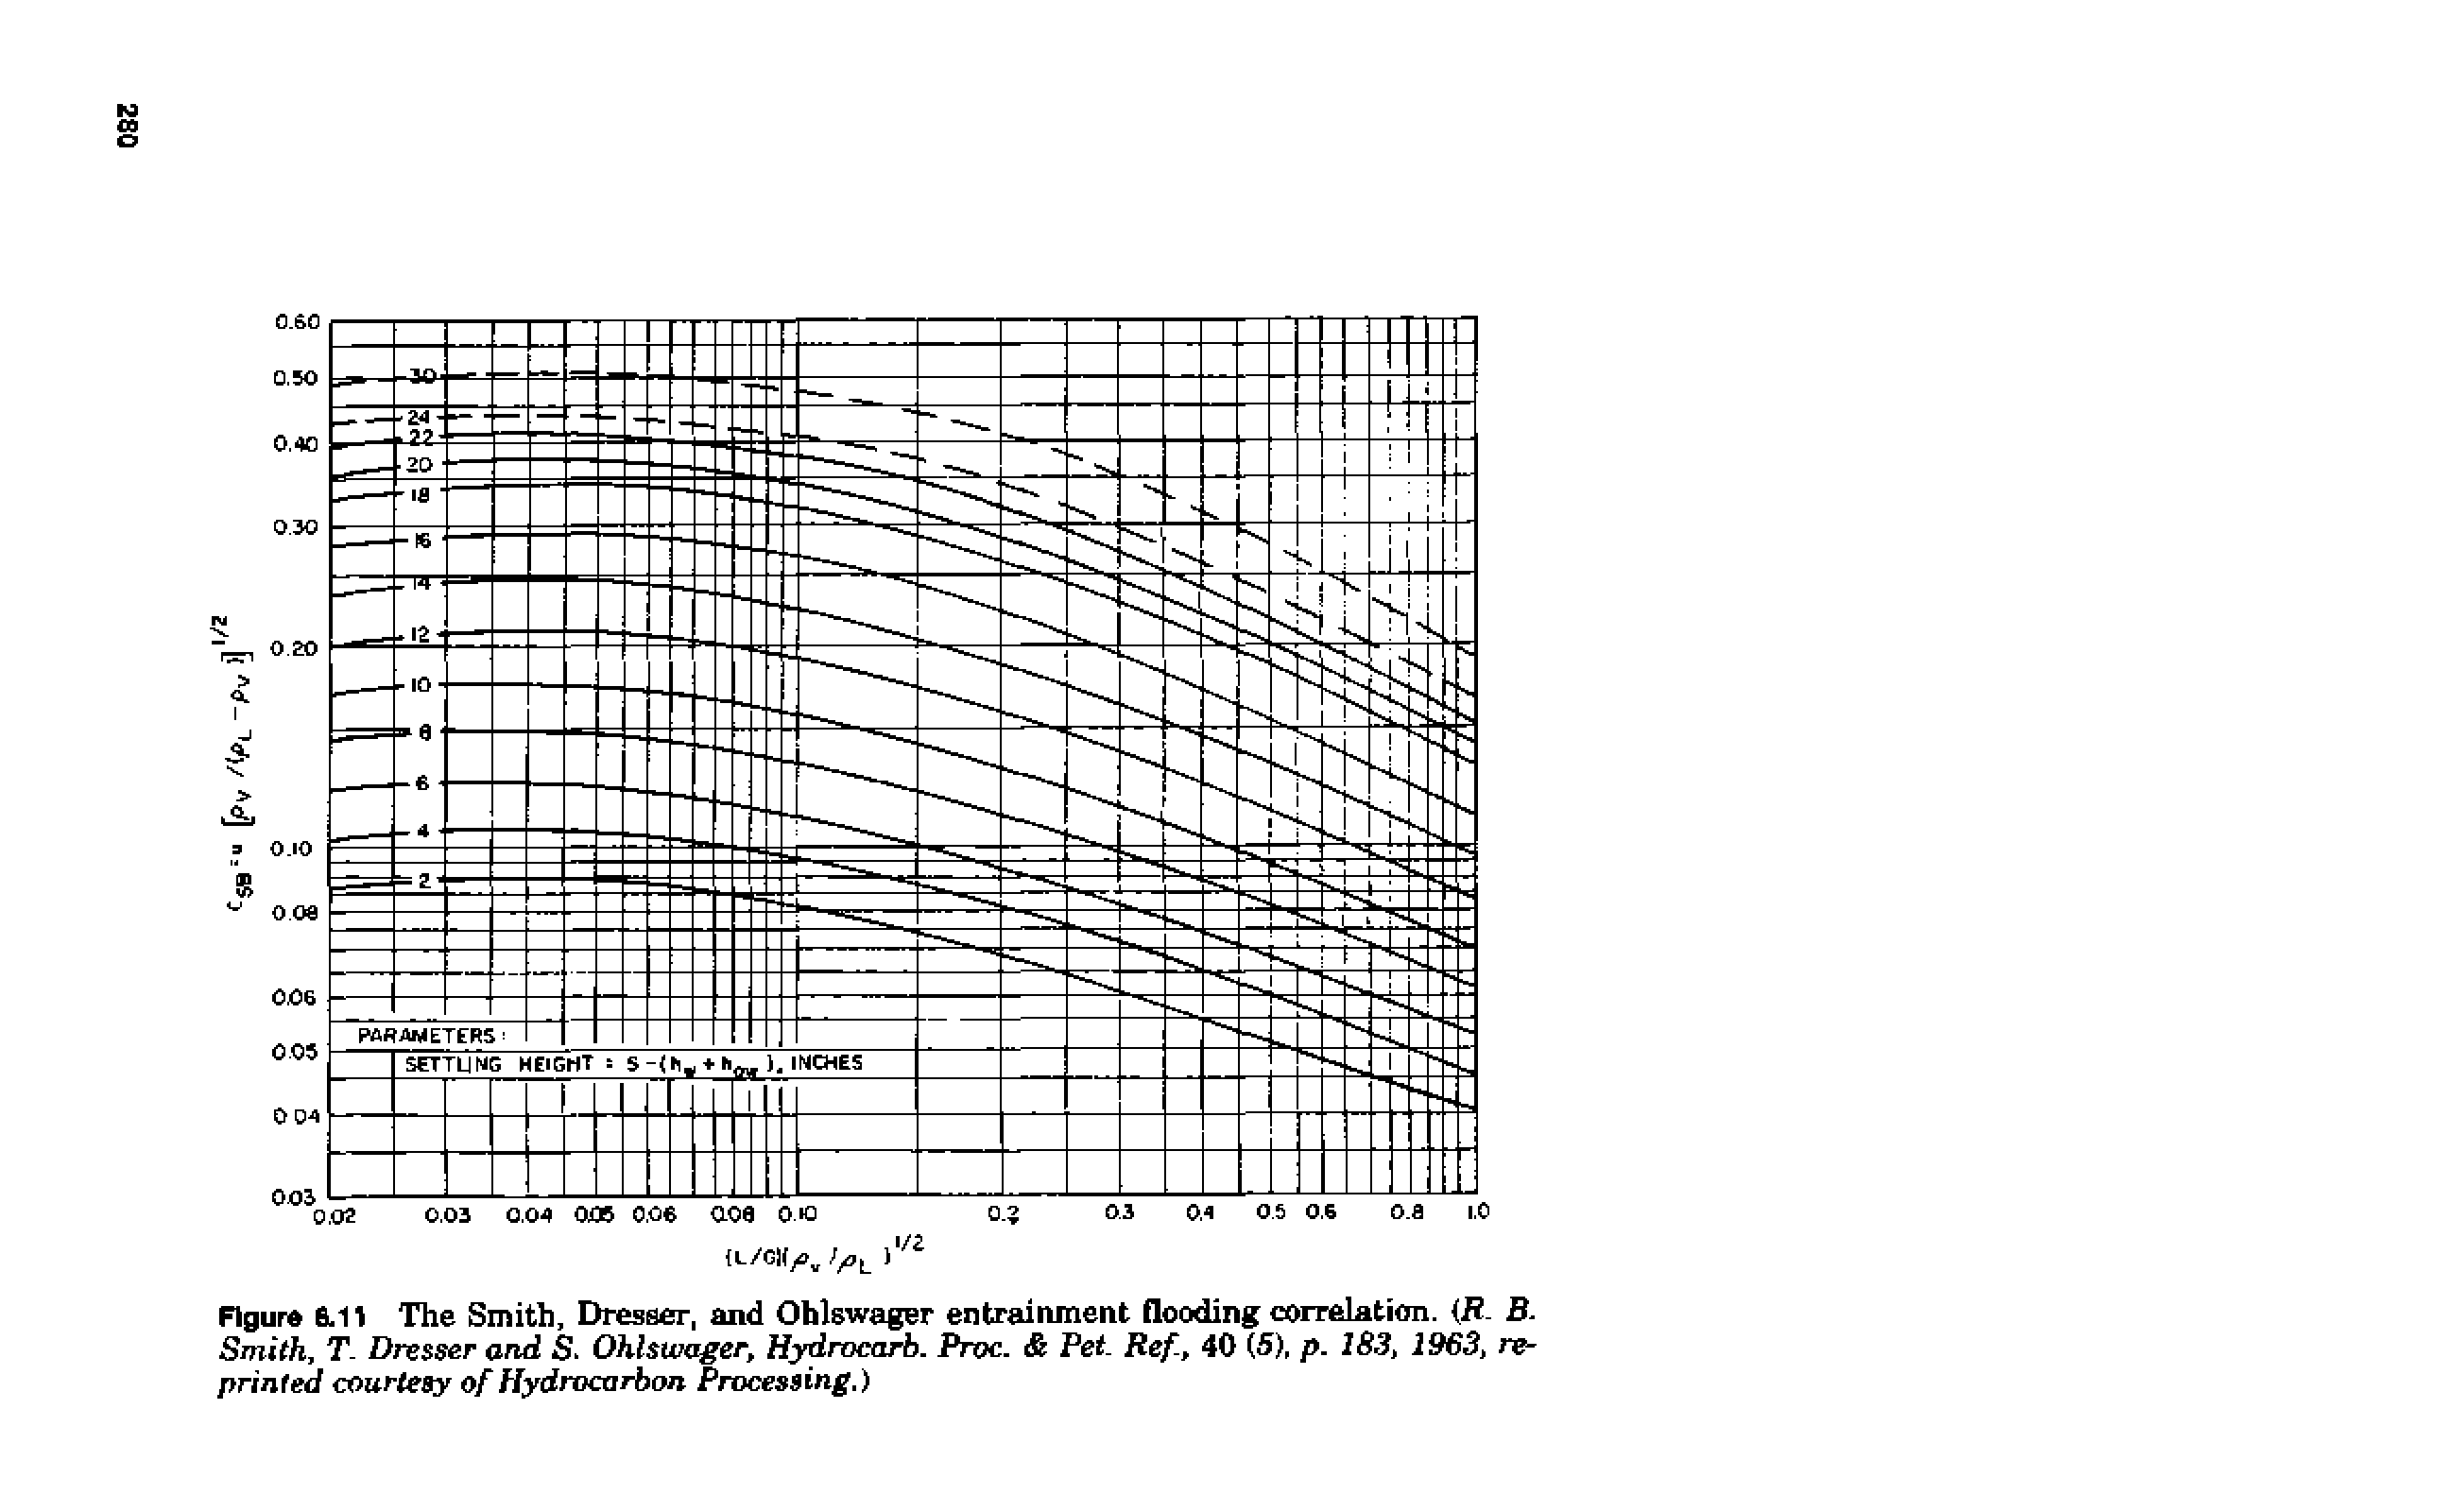 Figure 6.11 The Smith. Dresser, and Ohlswager entrainment flooding correlation. (R- B. Smith, T. Dresser and S. Ohlswager, Hydmcarb. Proc. Pet. Ref., 40 (5), p. 183, 1963, reprinted courtesy of Hydrocarbon Processing.)...